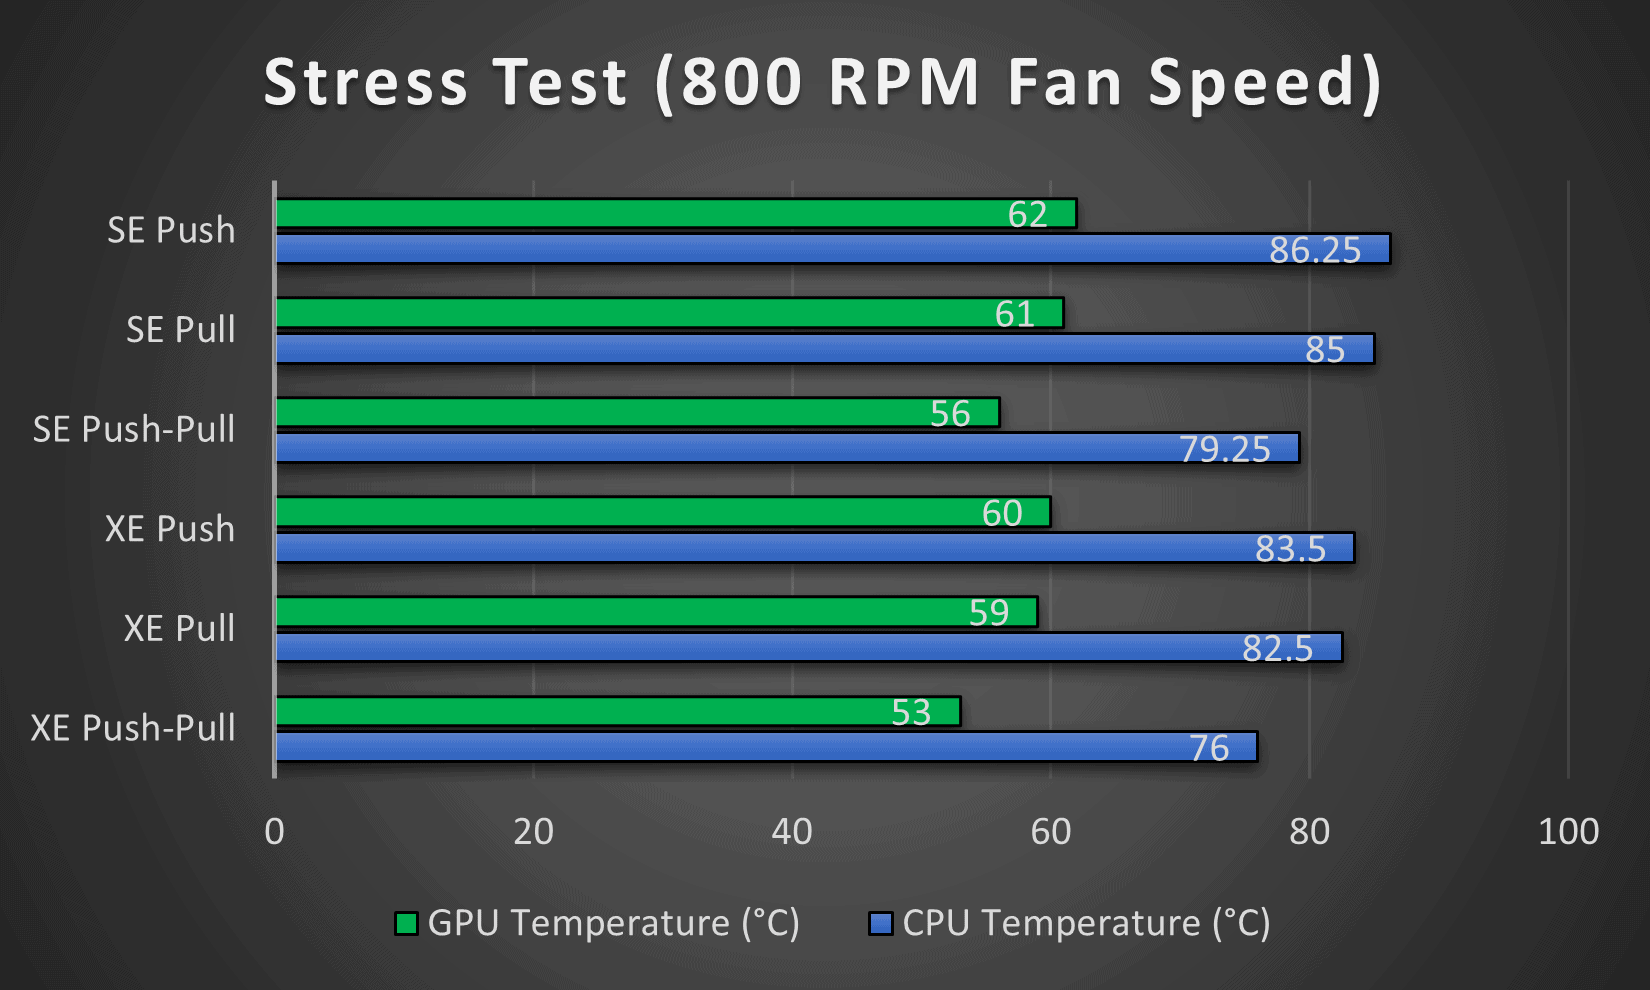 Stress Testing EK's 240mm SE (thin) and XE (thick) Liquid Coolers with, push, pull and push-pull configurations for both GPU and CPU. Fan speed at 800 RPM. 